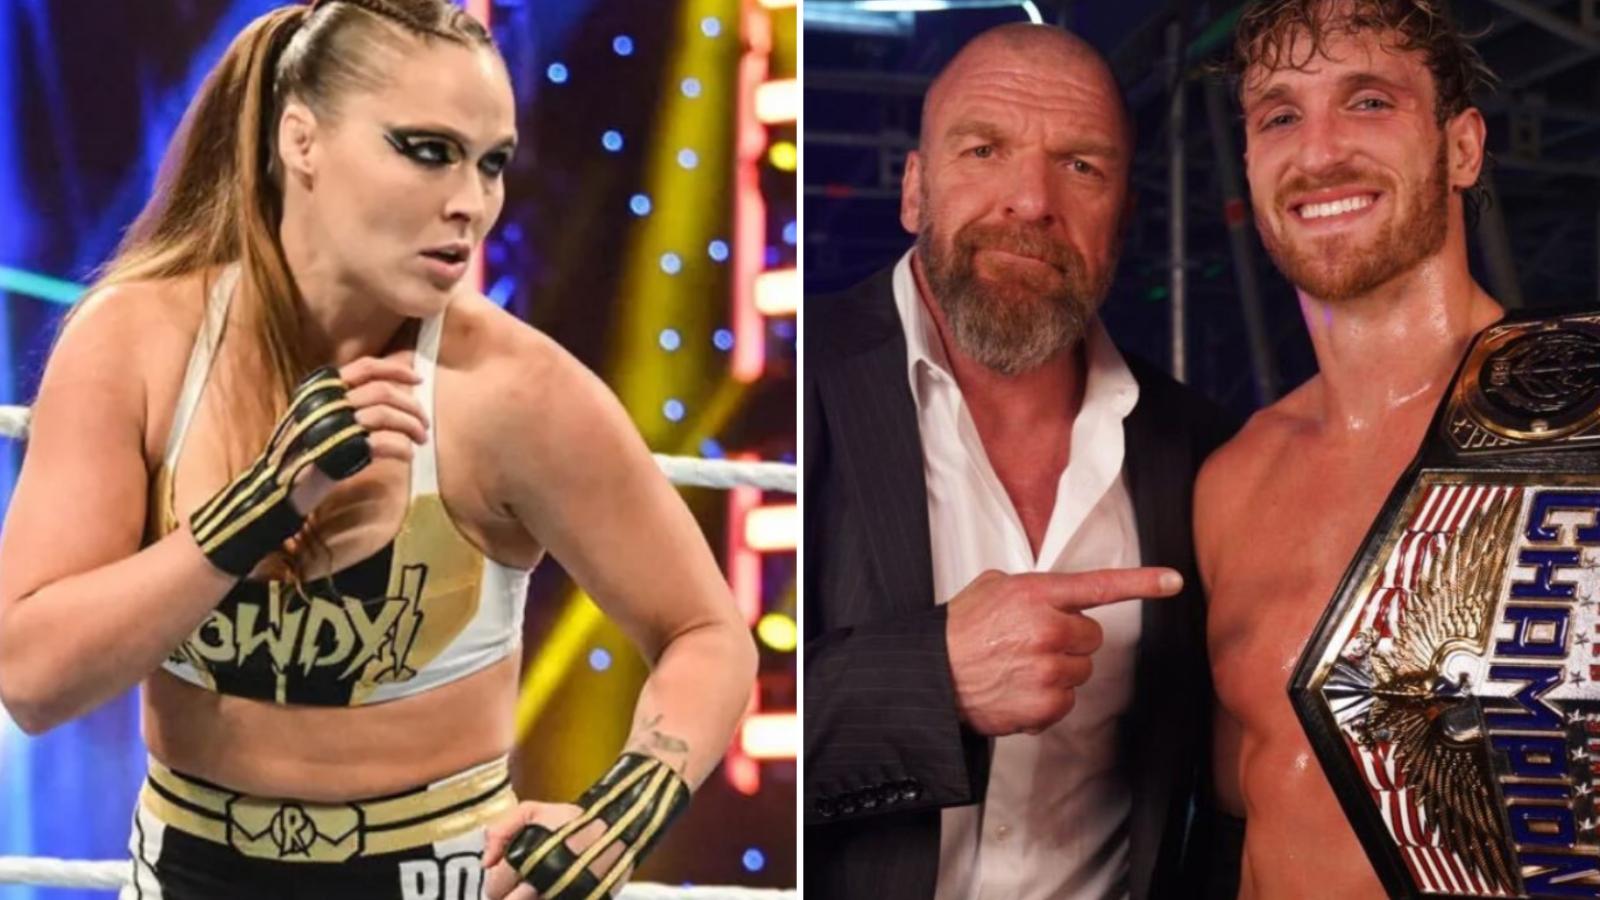 ronda rousey next to triple h and logan paul in wwe